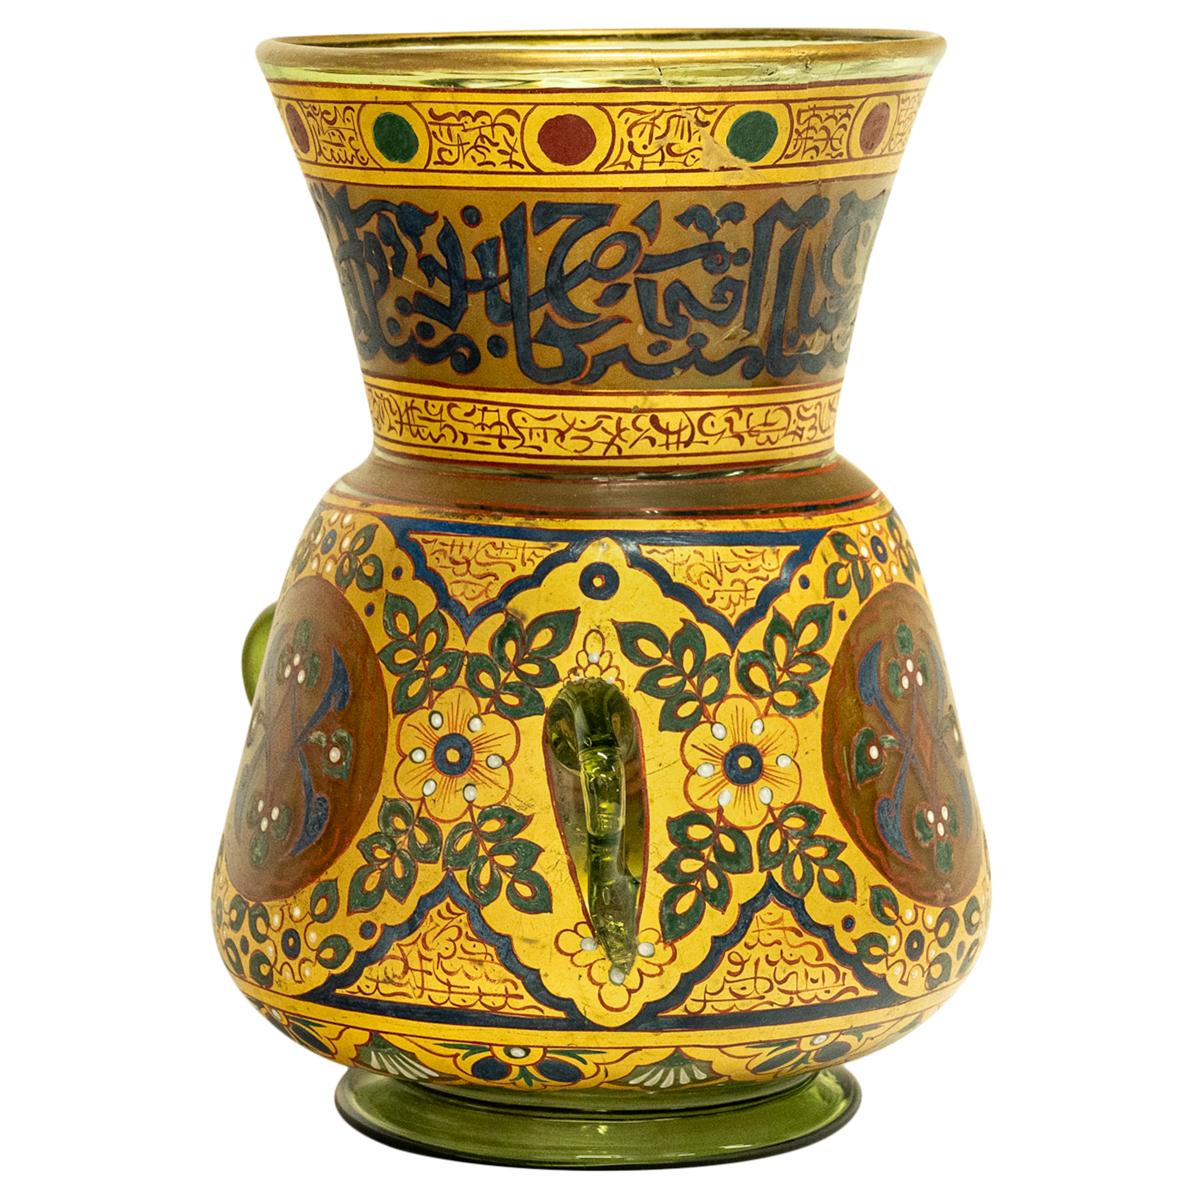 Antique French Islamic Glass Enamel Gilt Mamluk Revival Mosque Lamp Brocard 1880 For Sale 2